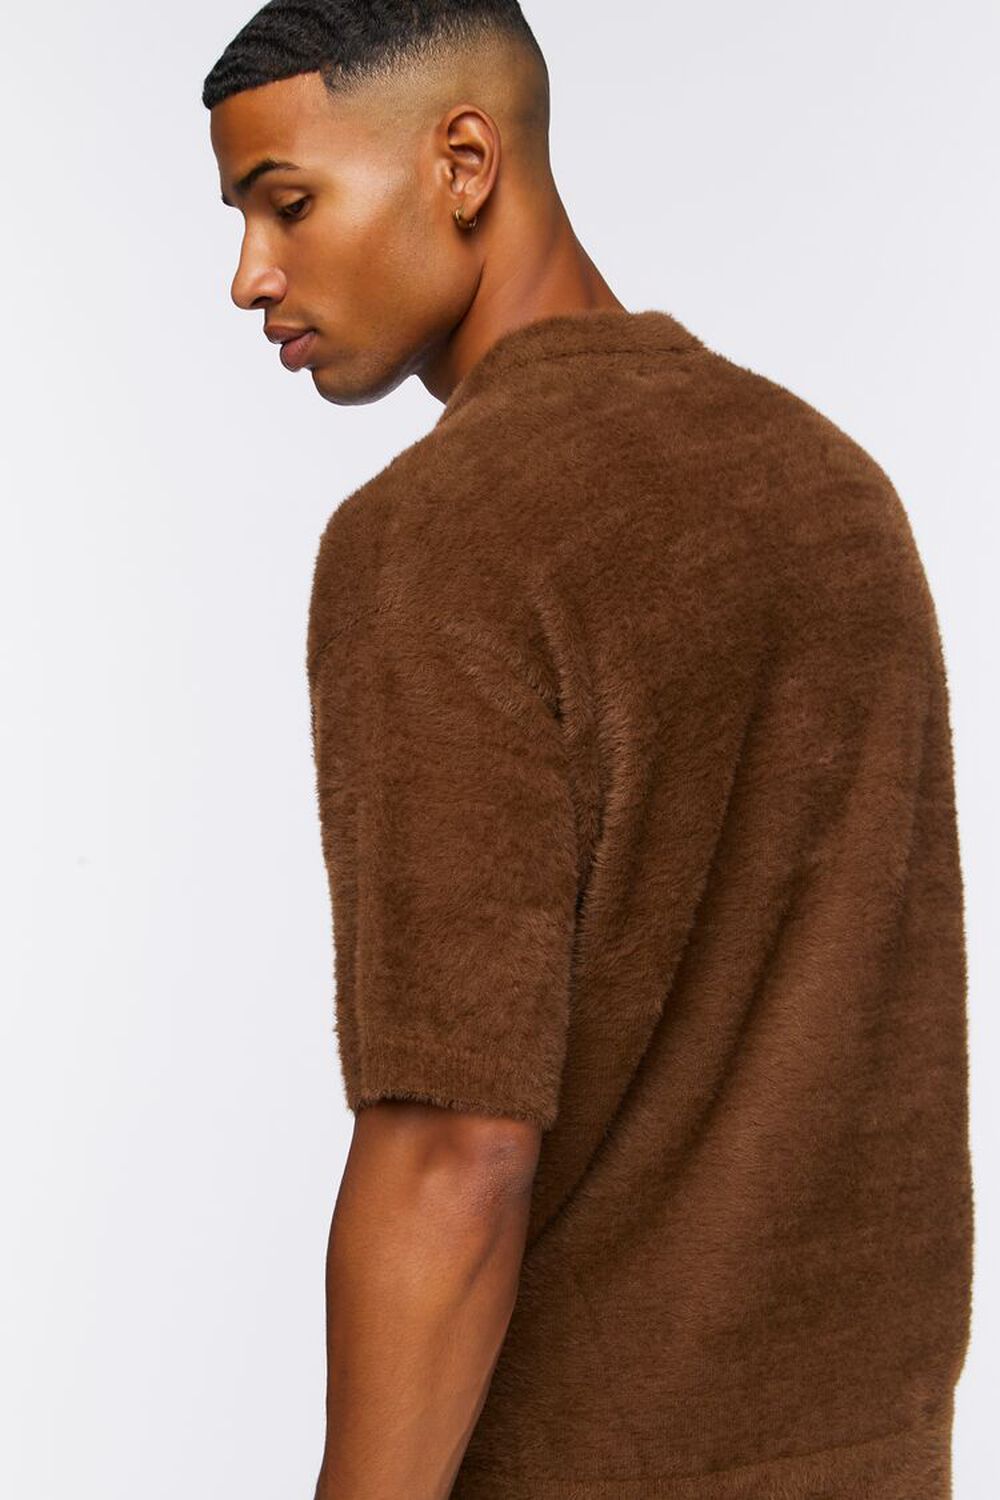 BROWN Fuzzy Knit Polo Shirt, image 3